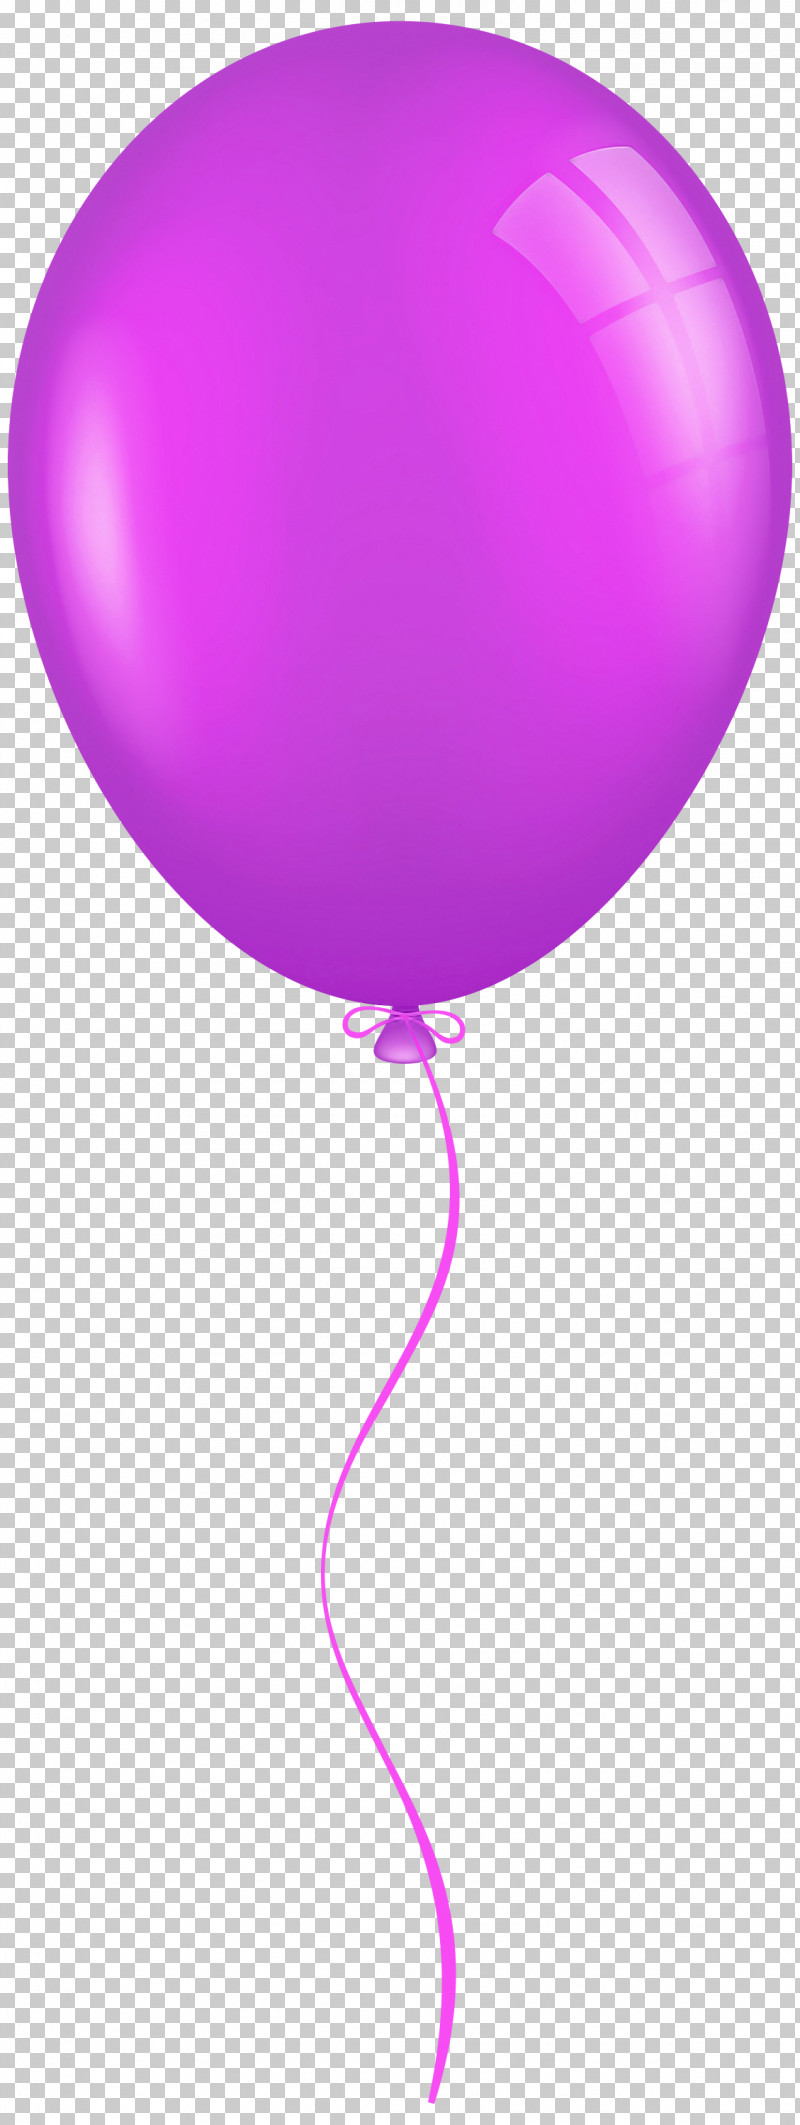 Balloon Pink Violet Purple Magenta PNG, Clipart, Balloon, Magenta, Material Property, Party Supply, Pink Free PNG Download